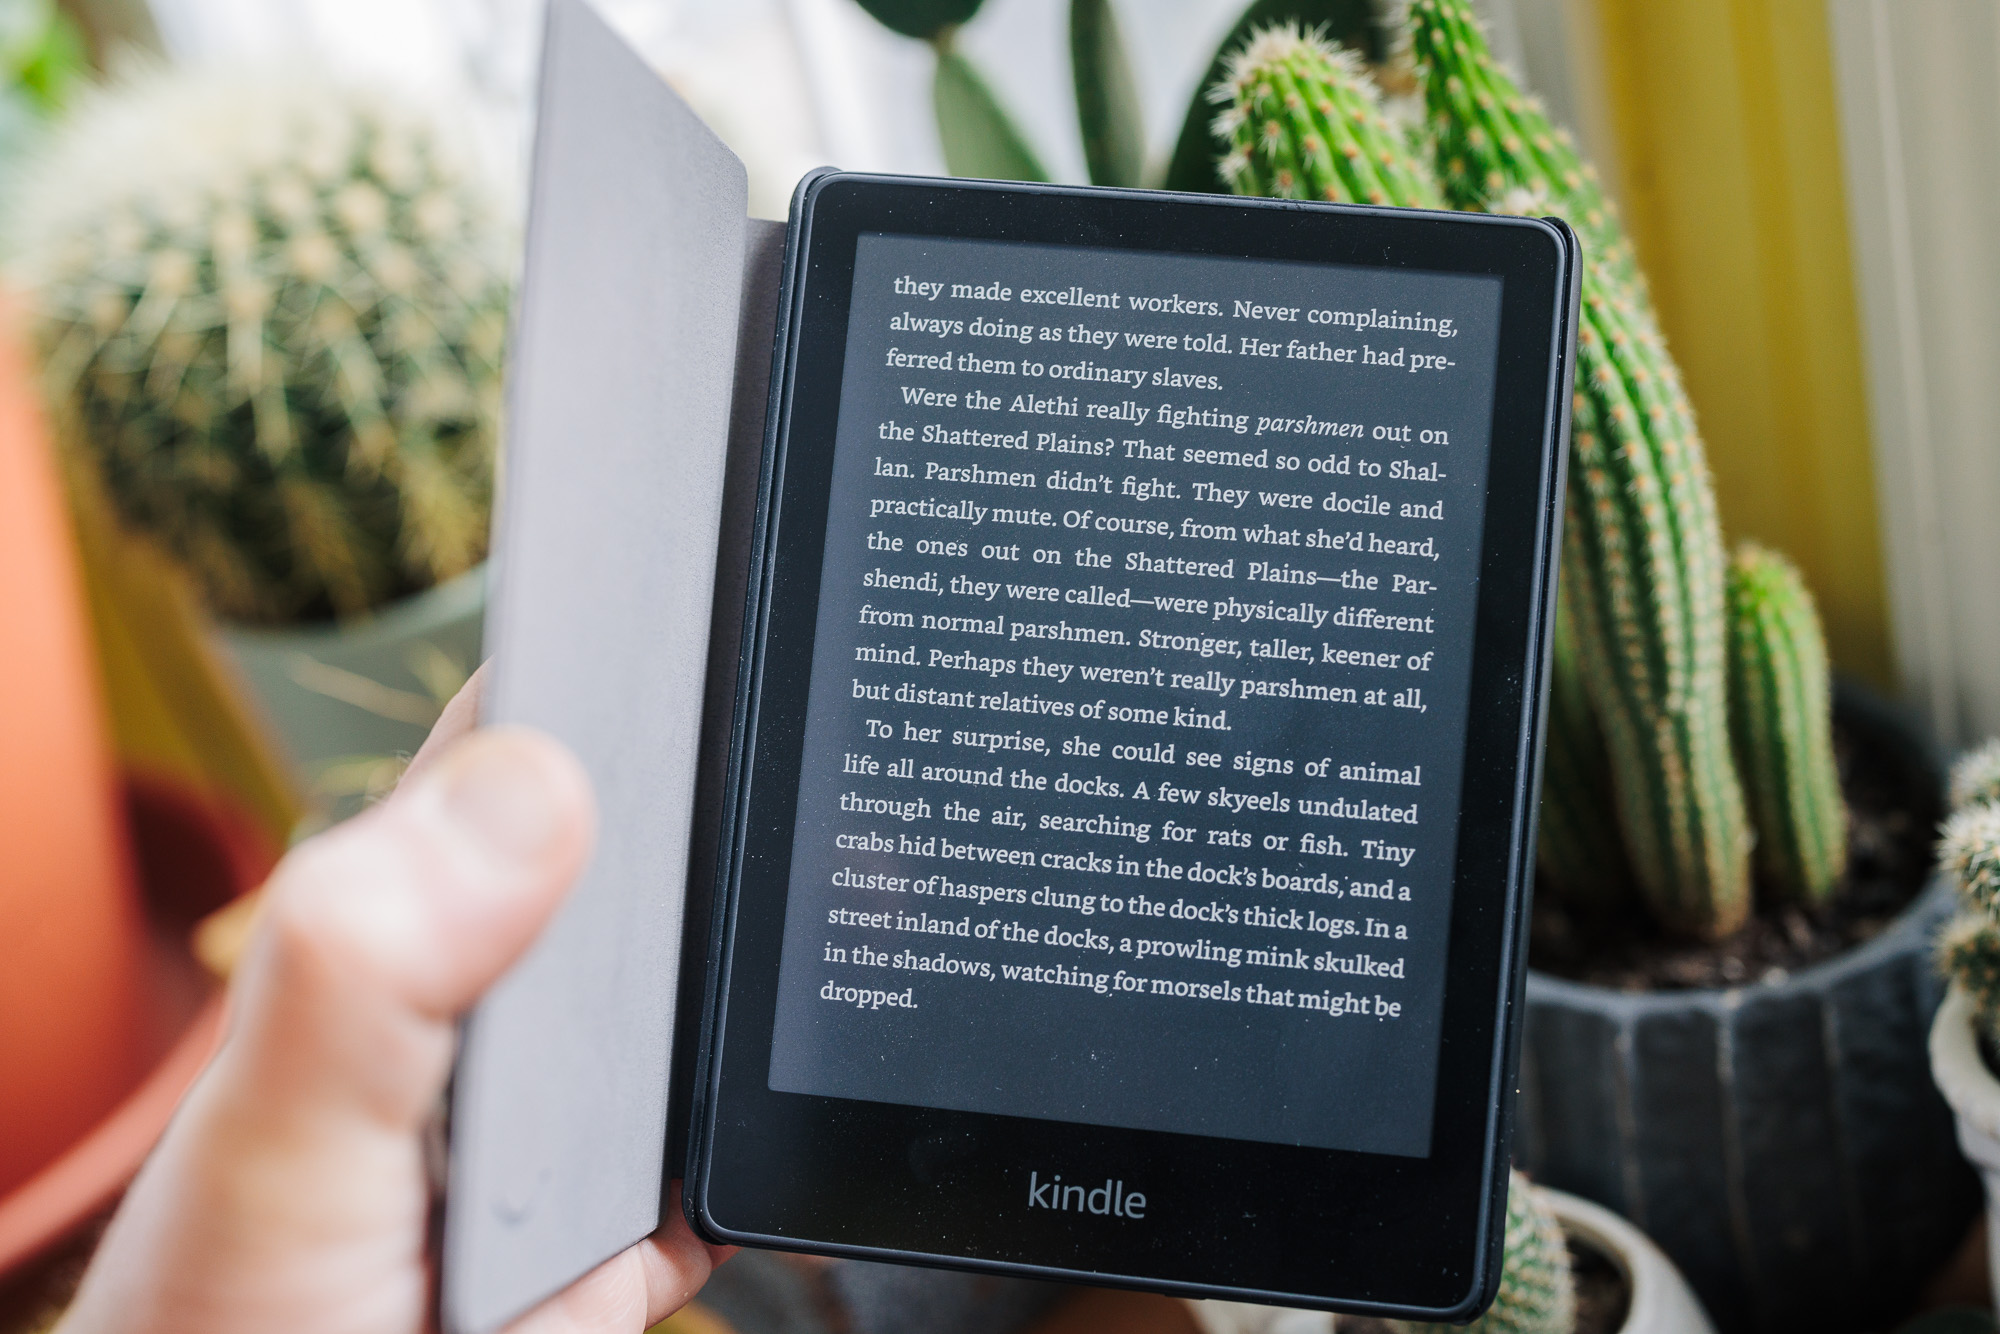 Amazon Kindle Paperwhite open in front of cactuses